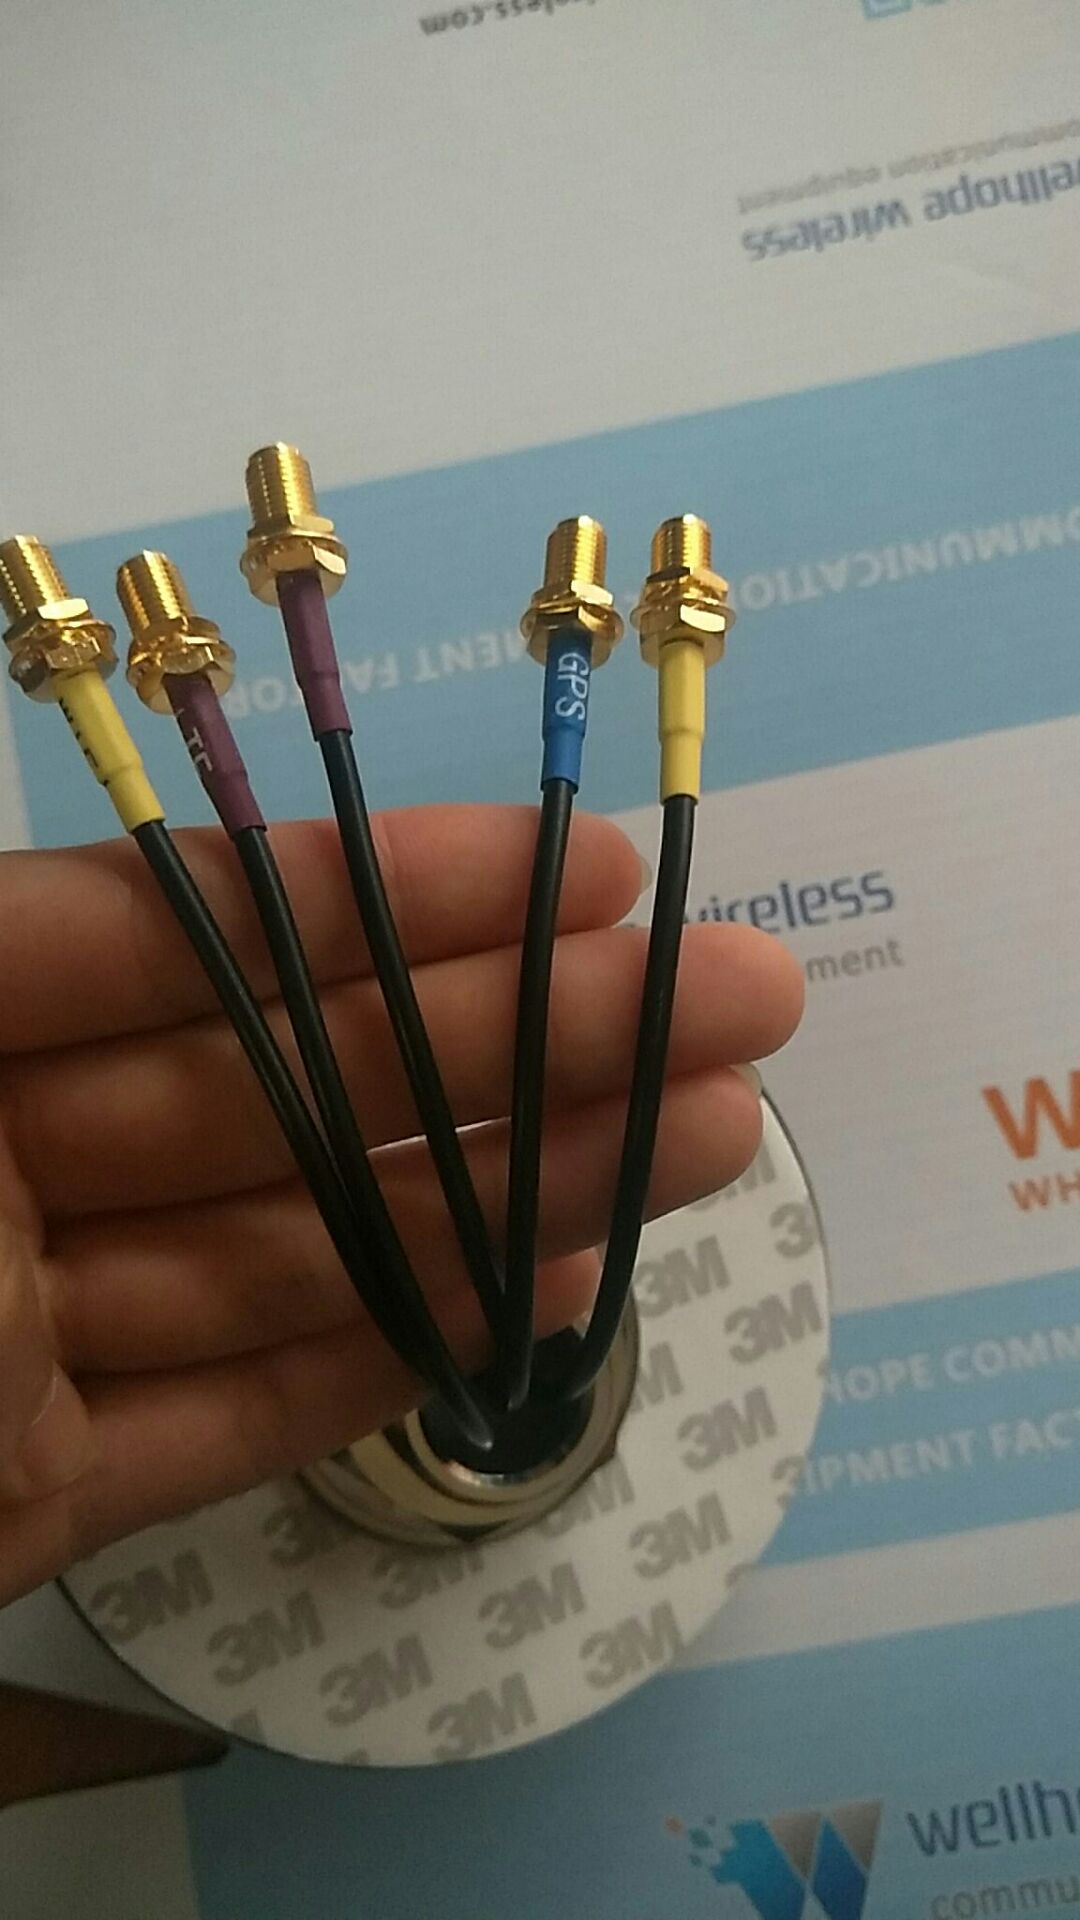  WH-MIMO-03X5 GPS Glonass 4G WLAN ANTENNA have finished